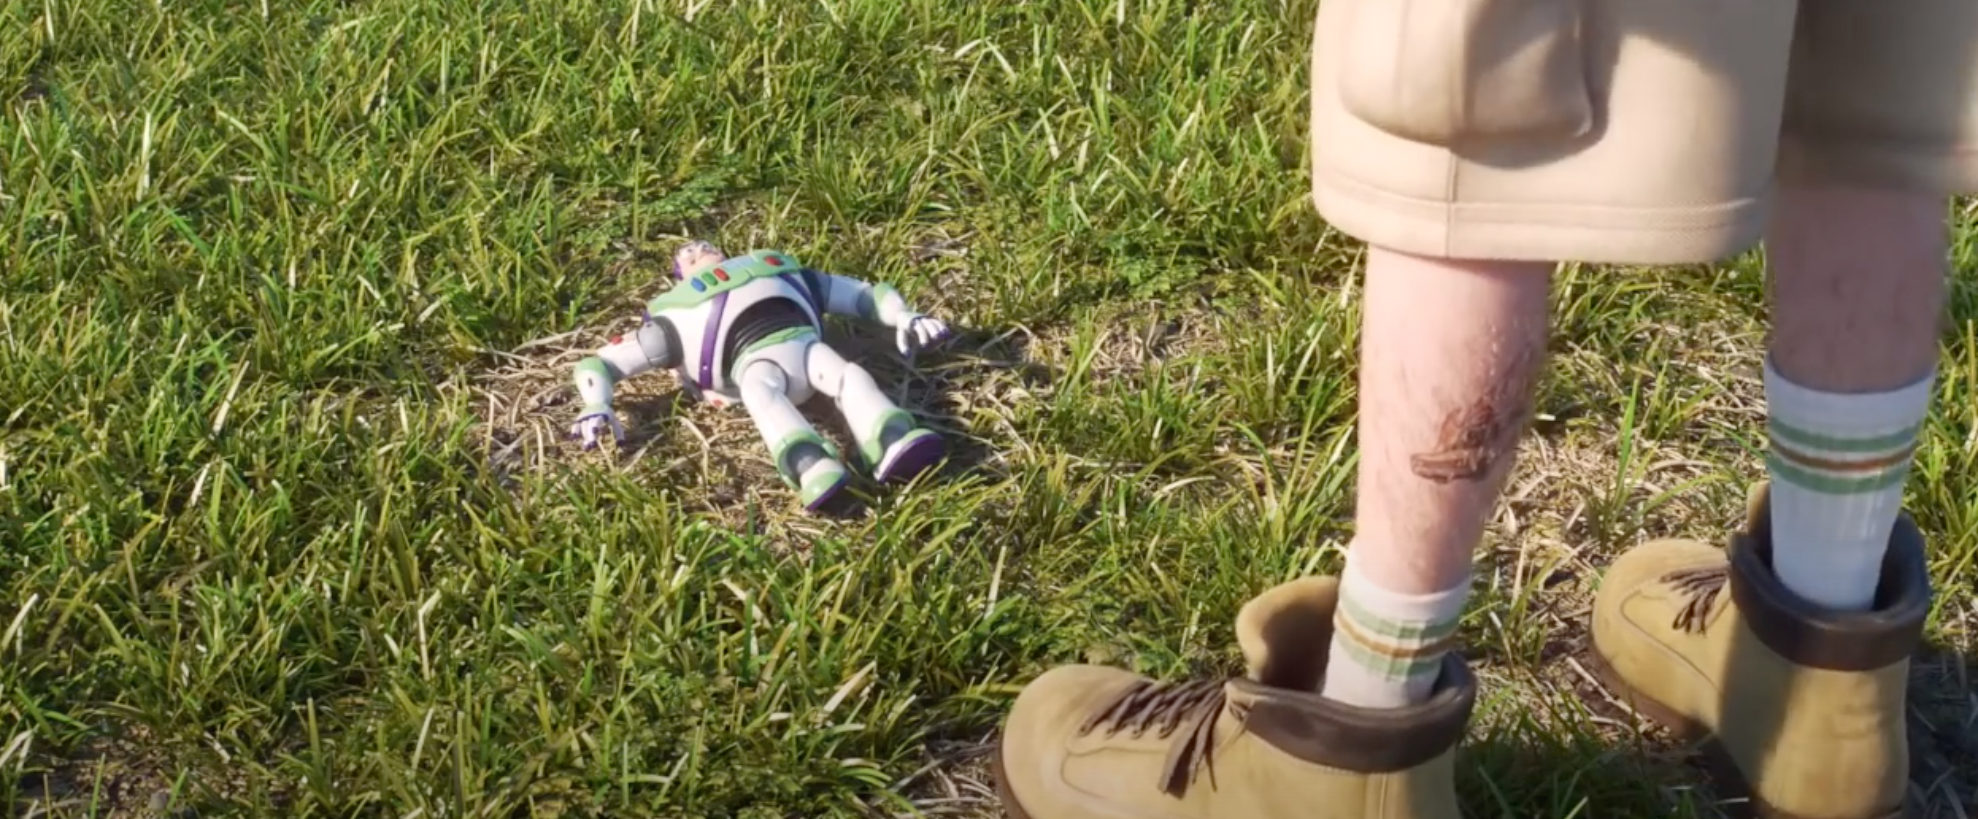 Buzz Lightyear laying in the grass and a man's legs with a tattoo of the Pizza Planet truck on the left one next to him in Toy Story 4.